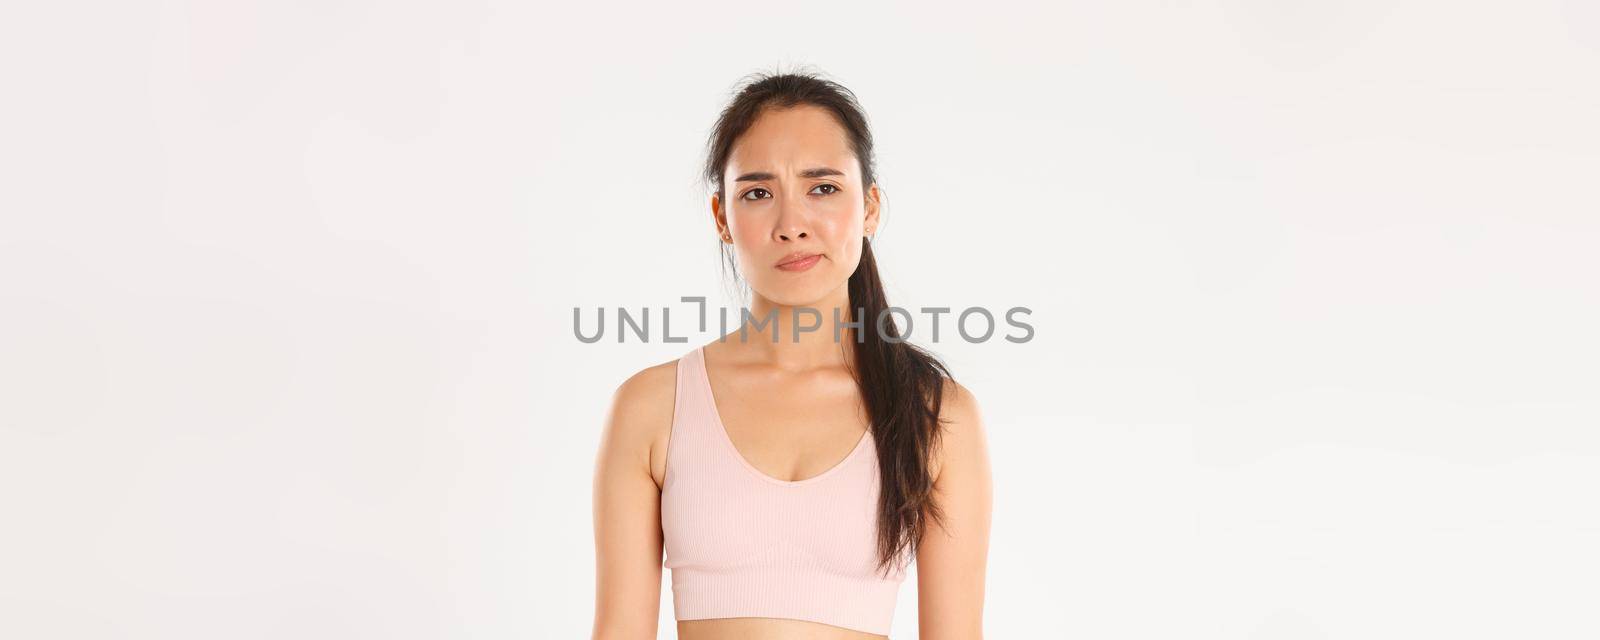 Sport, wellbeing and active lifestyle concept. Skeptical and displeased asian sportswoman, female athlete smirk disappointed and unamused, looking left with frowning face, white background.